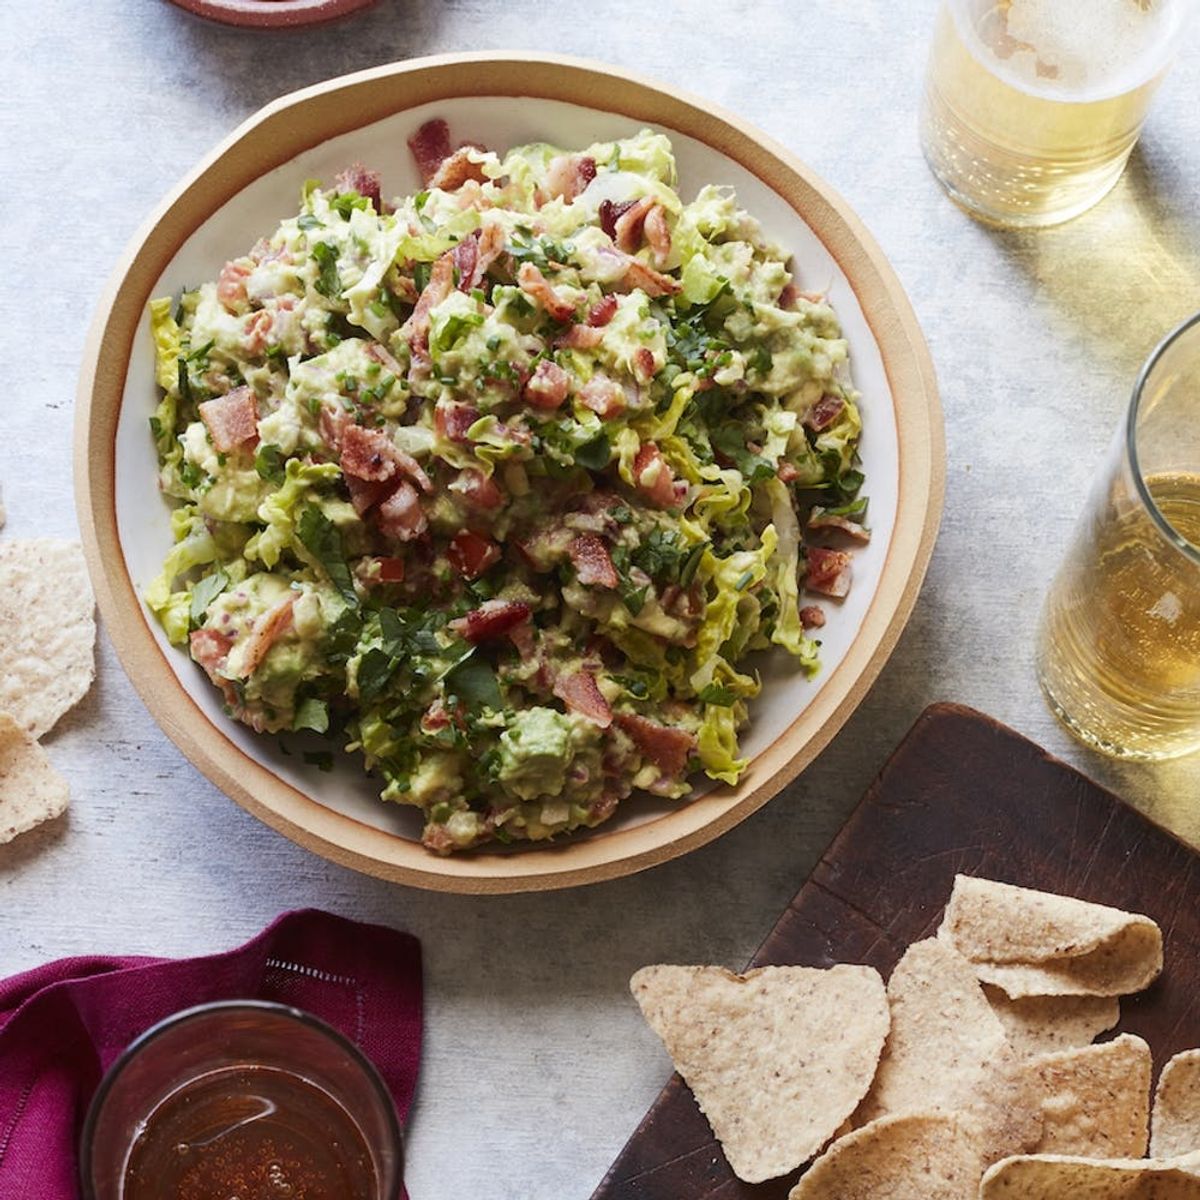 4 Unexpectedly Awesome Apps to Serve at Your Super Bowl Party